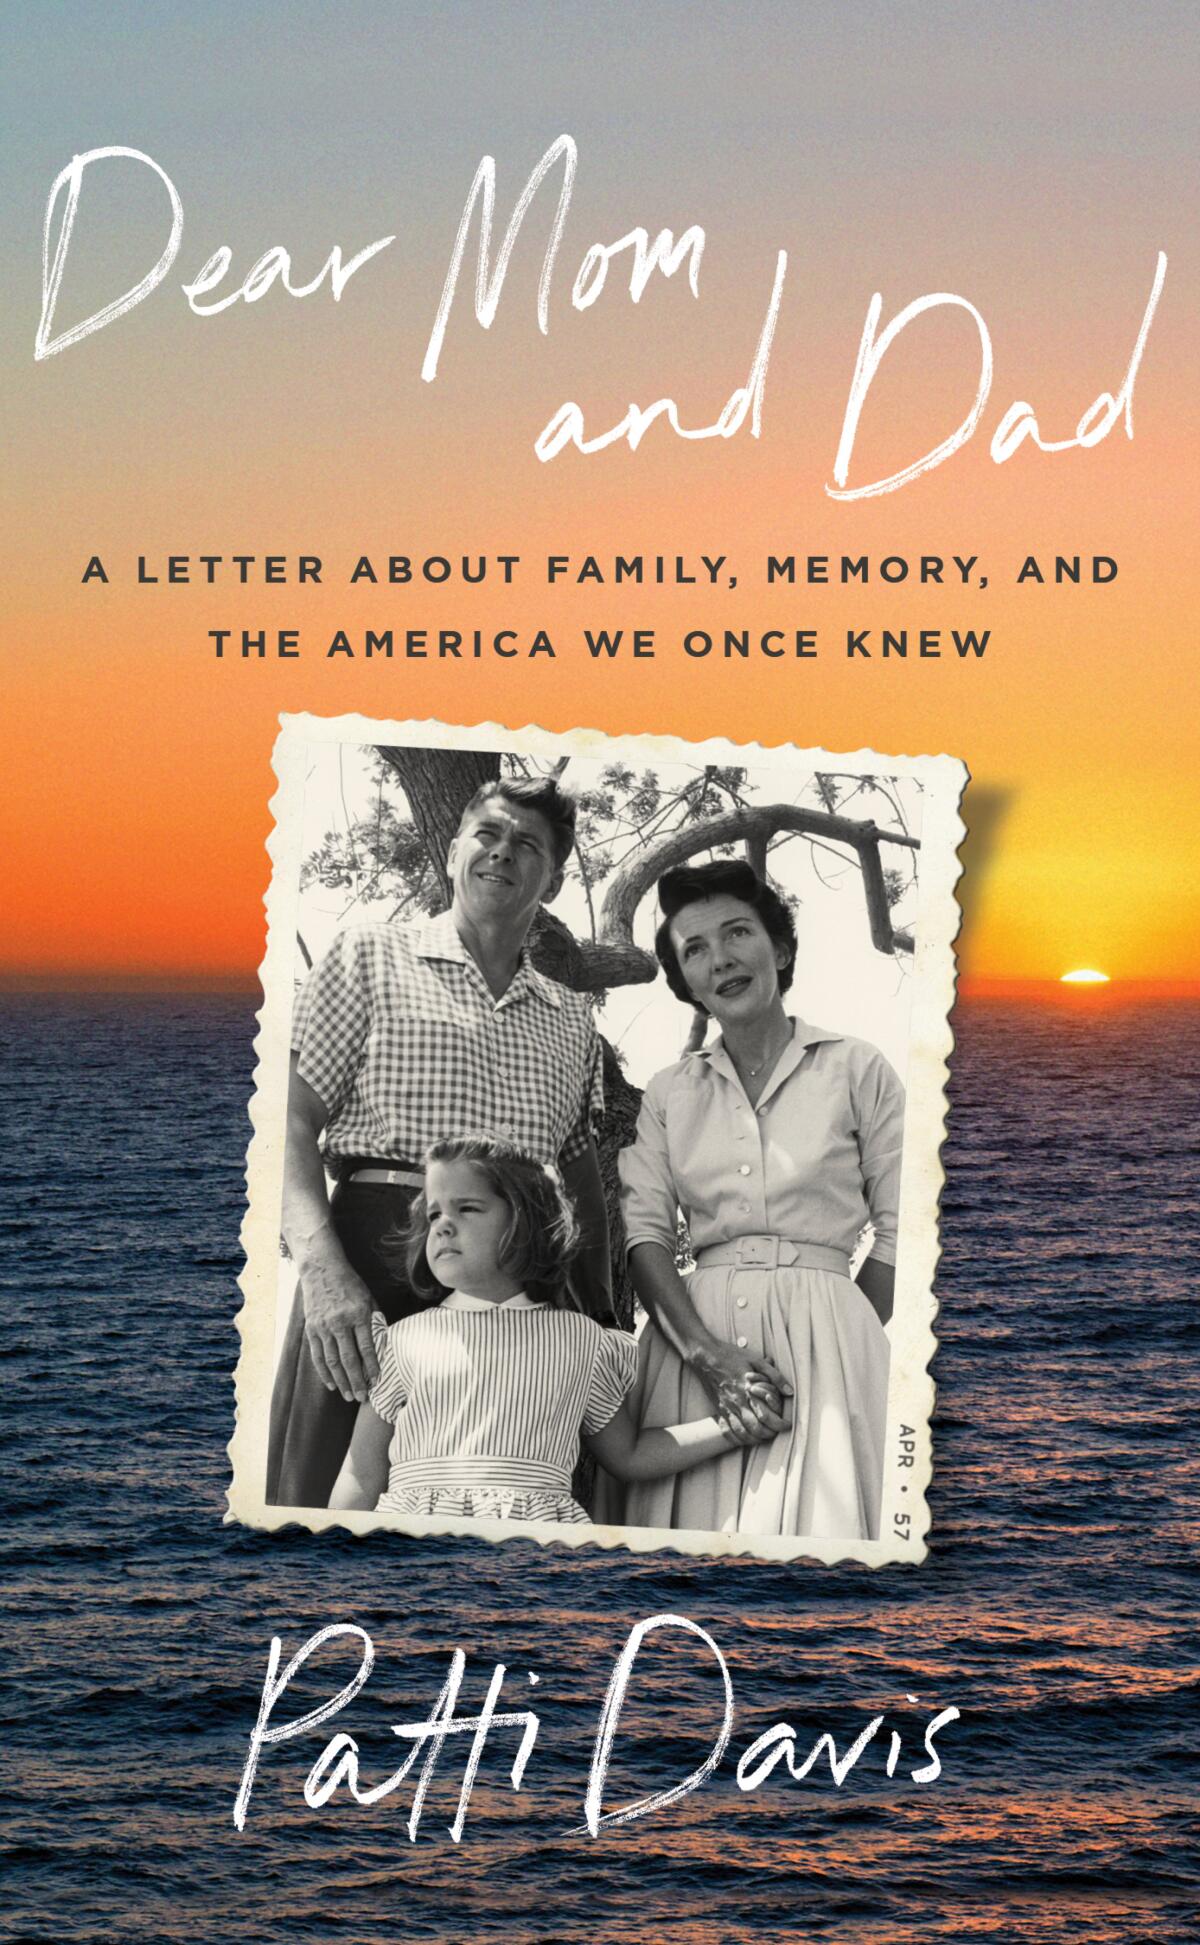 'Dear Mom and Dad: A Letter About Family, Memory, and the America We Once Knew' by Patti Davis